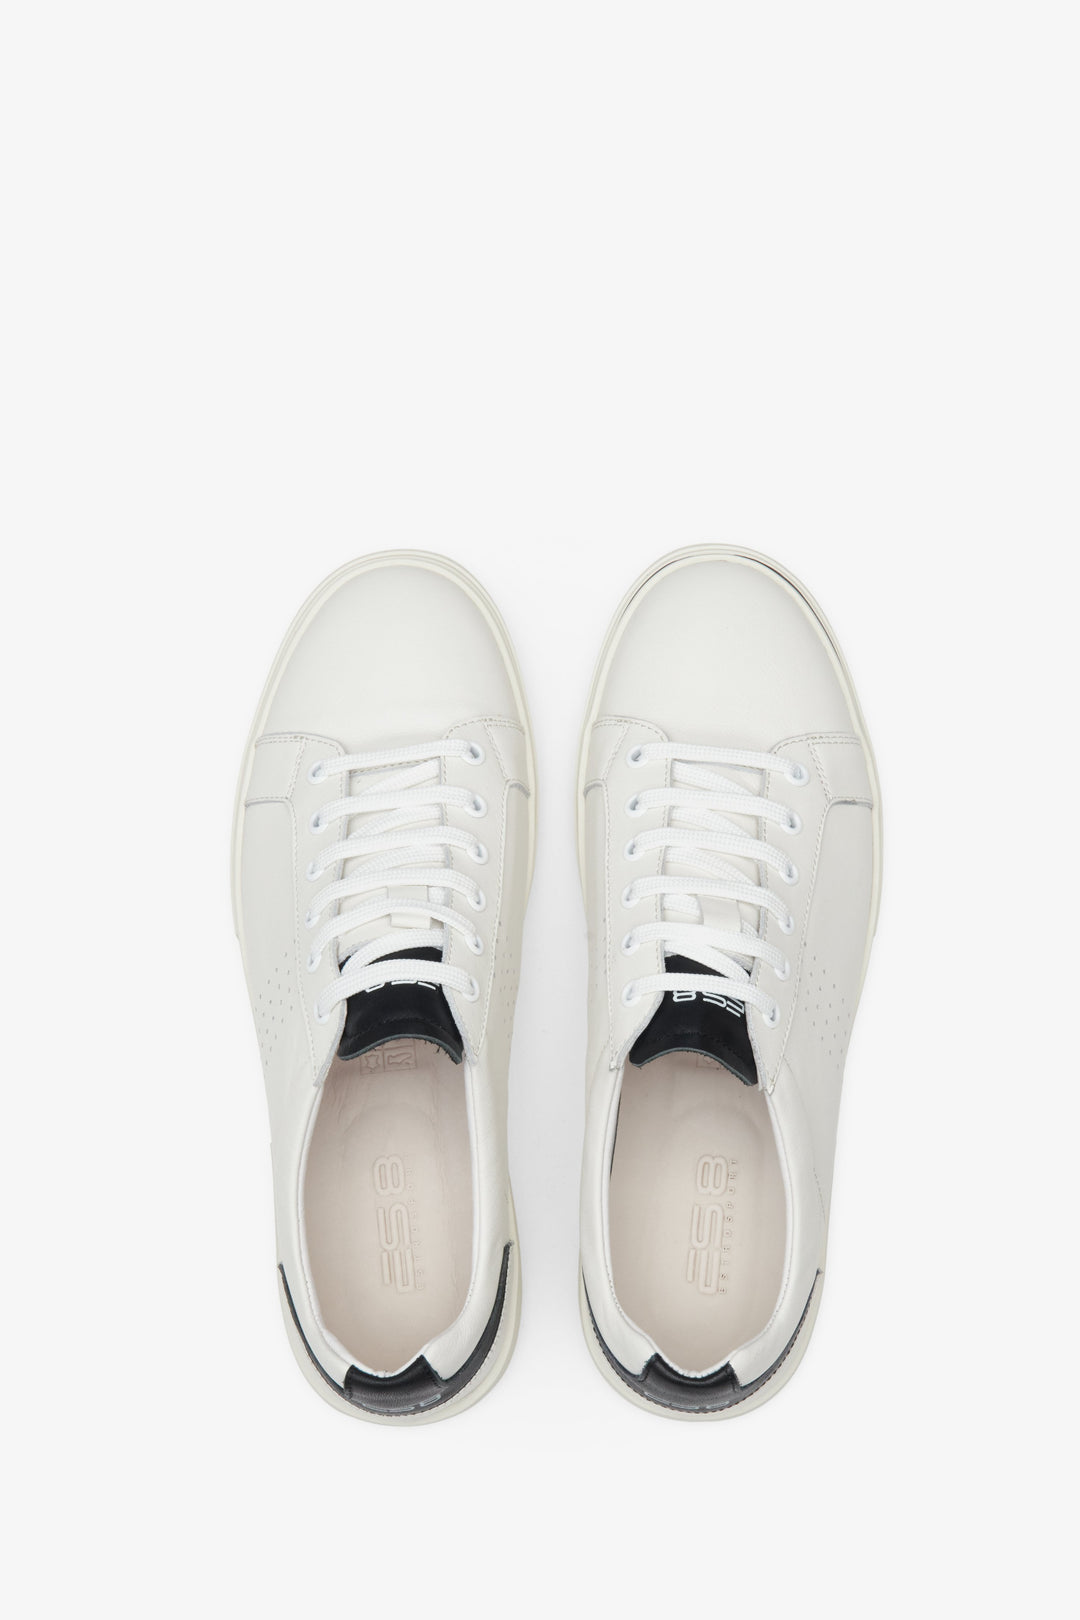 Men's leather sneakers for spring and autumn by ES 8 in black and white: top view shoe presentation.